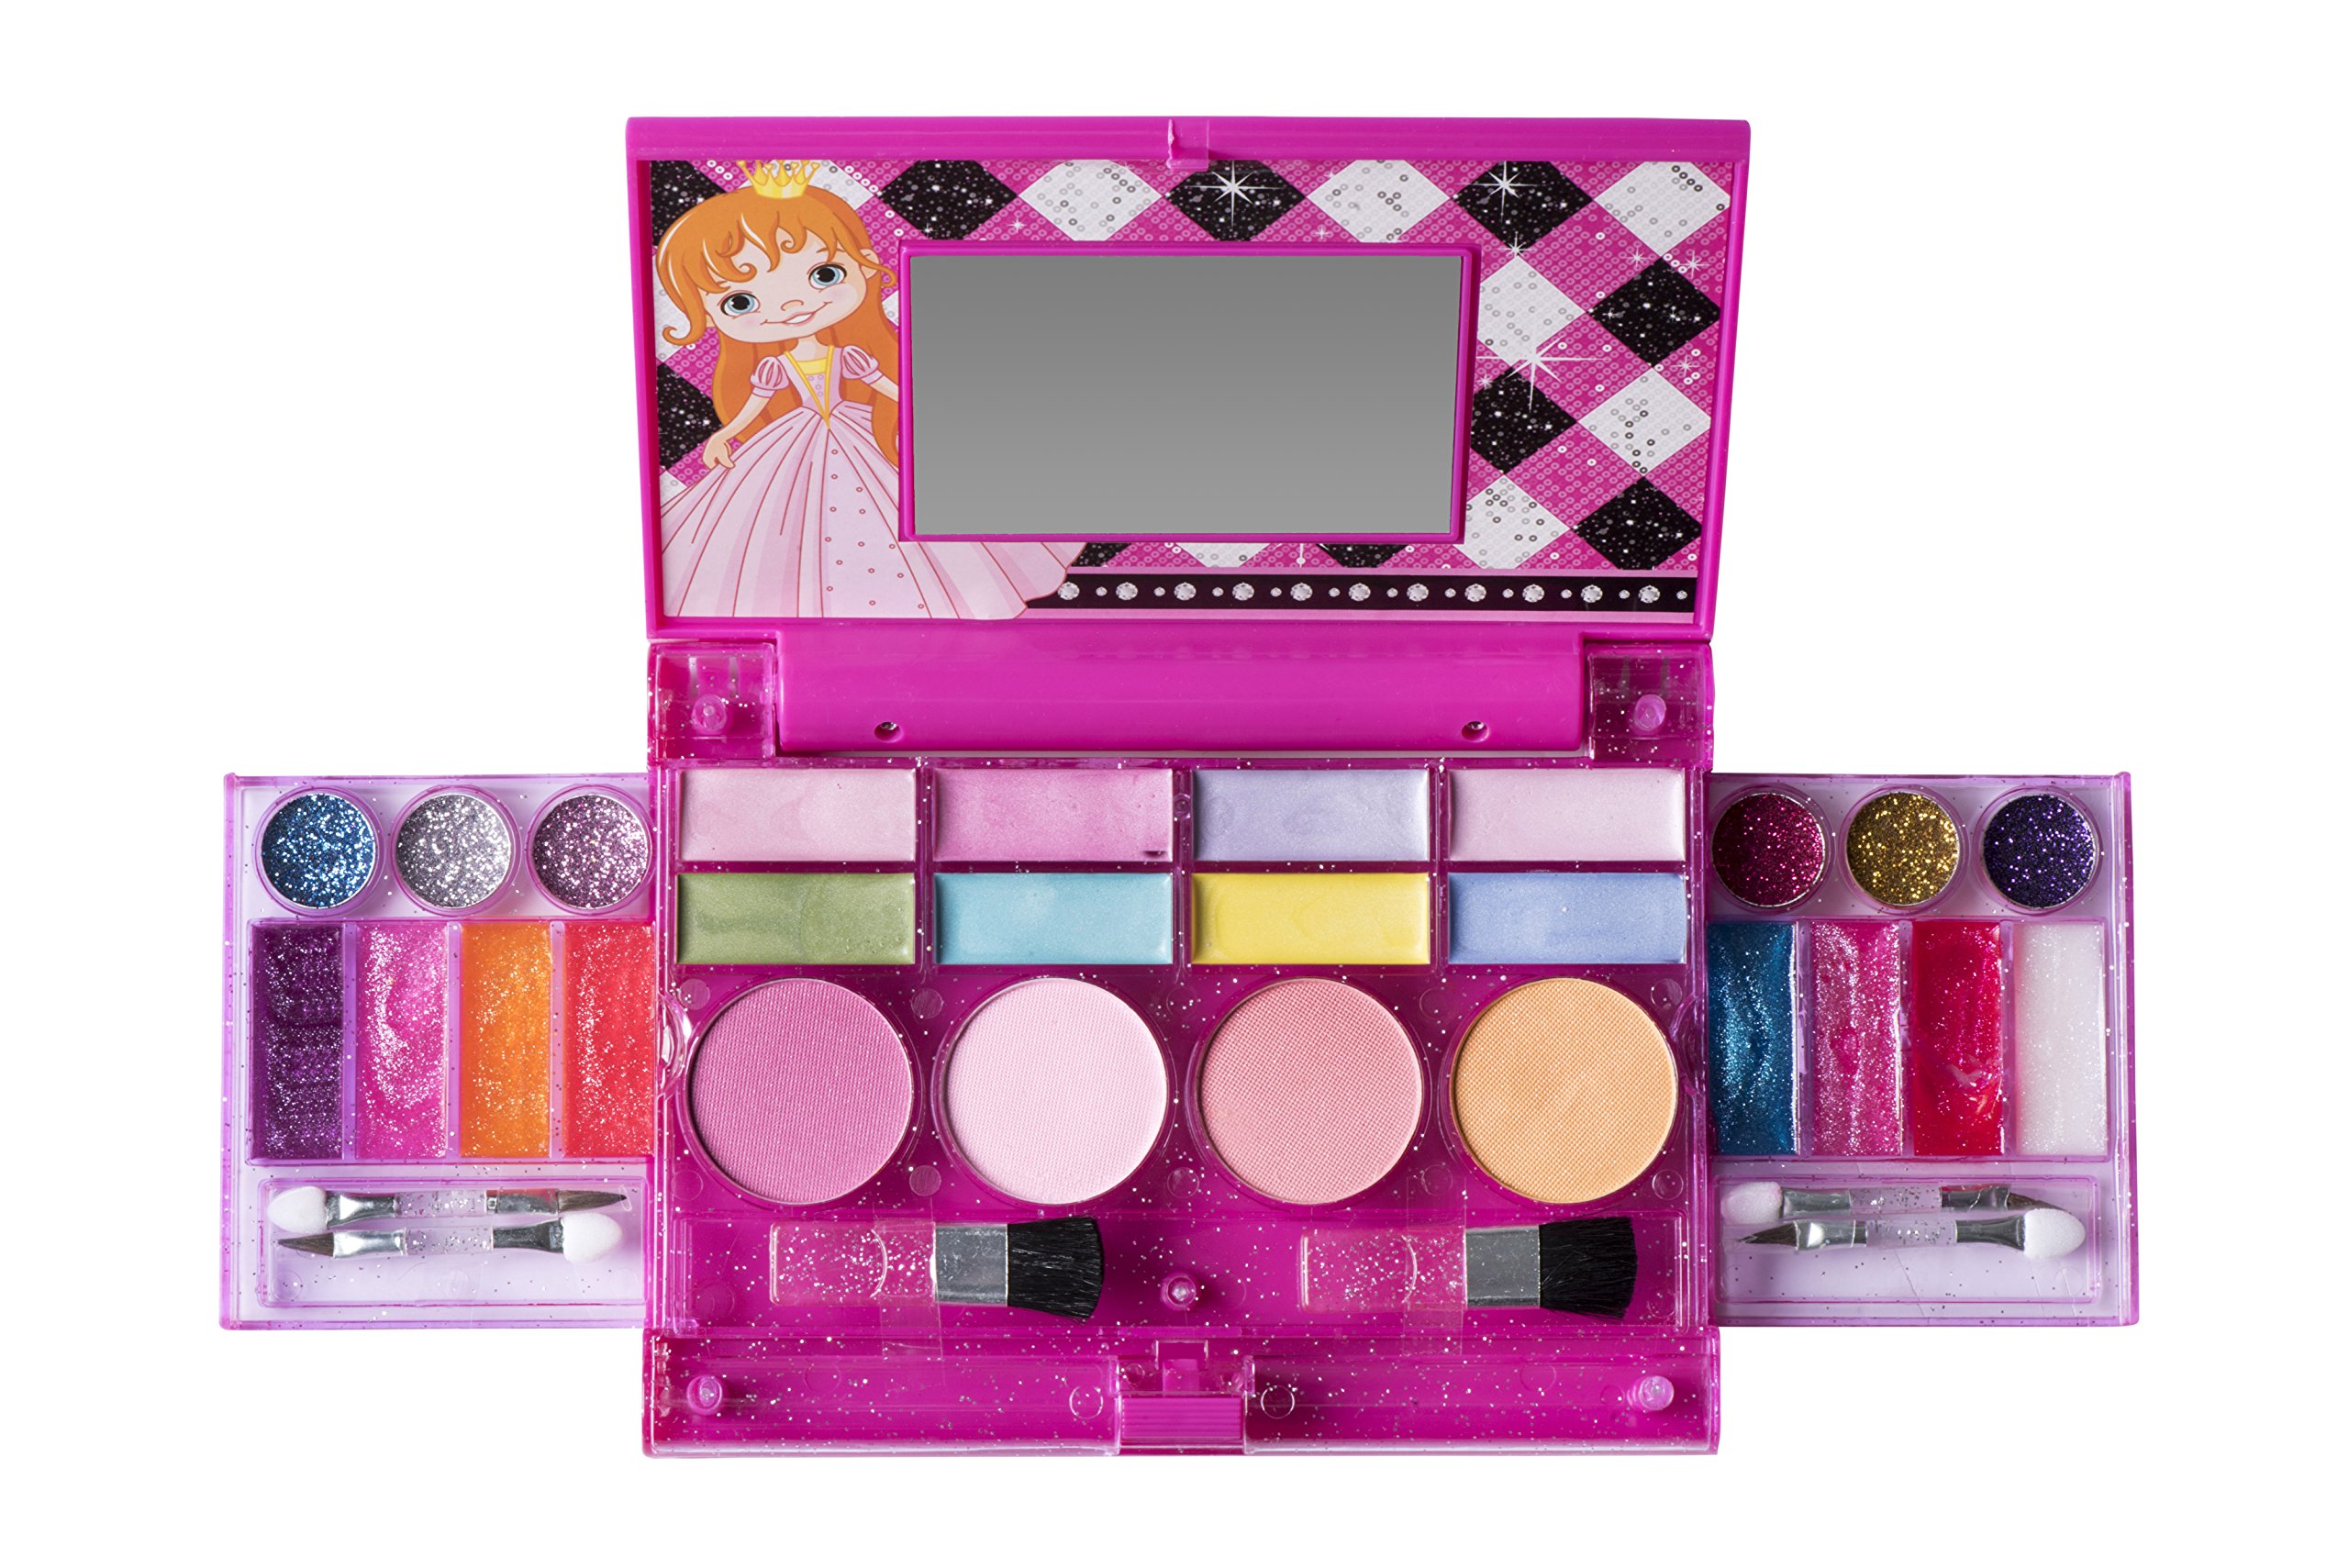 PlaykizPlaykidz: My First Princess Makeup Chest, Girl's All-In-One Deluxe Cosmetic and Real Makeup Palette with Mirror (Washable) - image 2 of 5